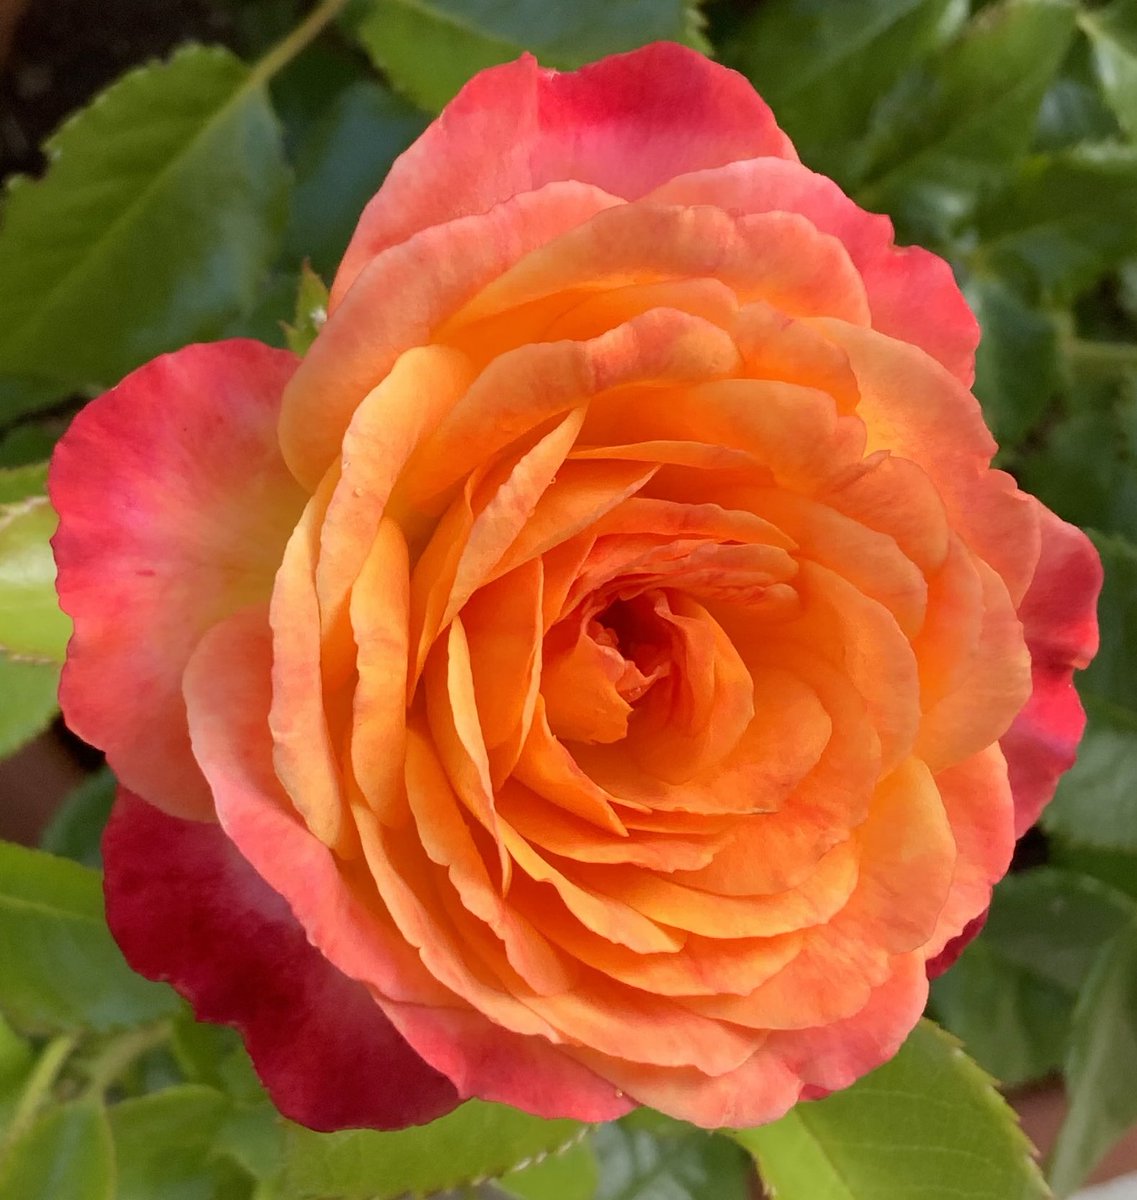 For #RoseWednesday ‘Meteor’ Rose of the Year 2024. A very welcome still and sunny morning here. Rain forecast later - of course! Have a good day everyone, whatever the weather brings. @loujnicholls @kgimson